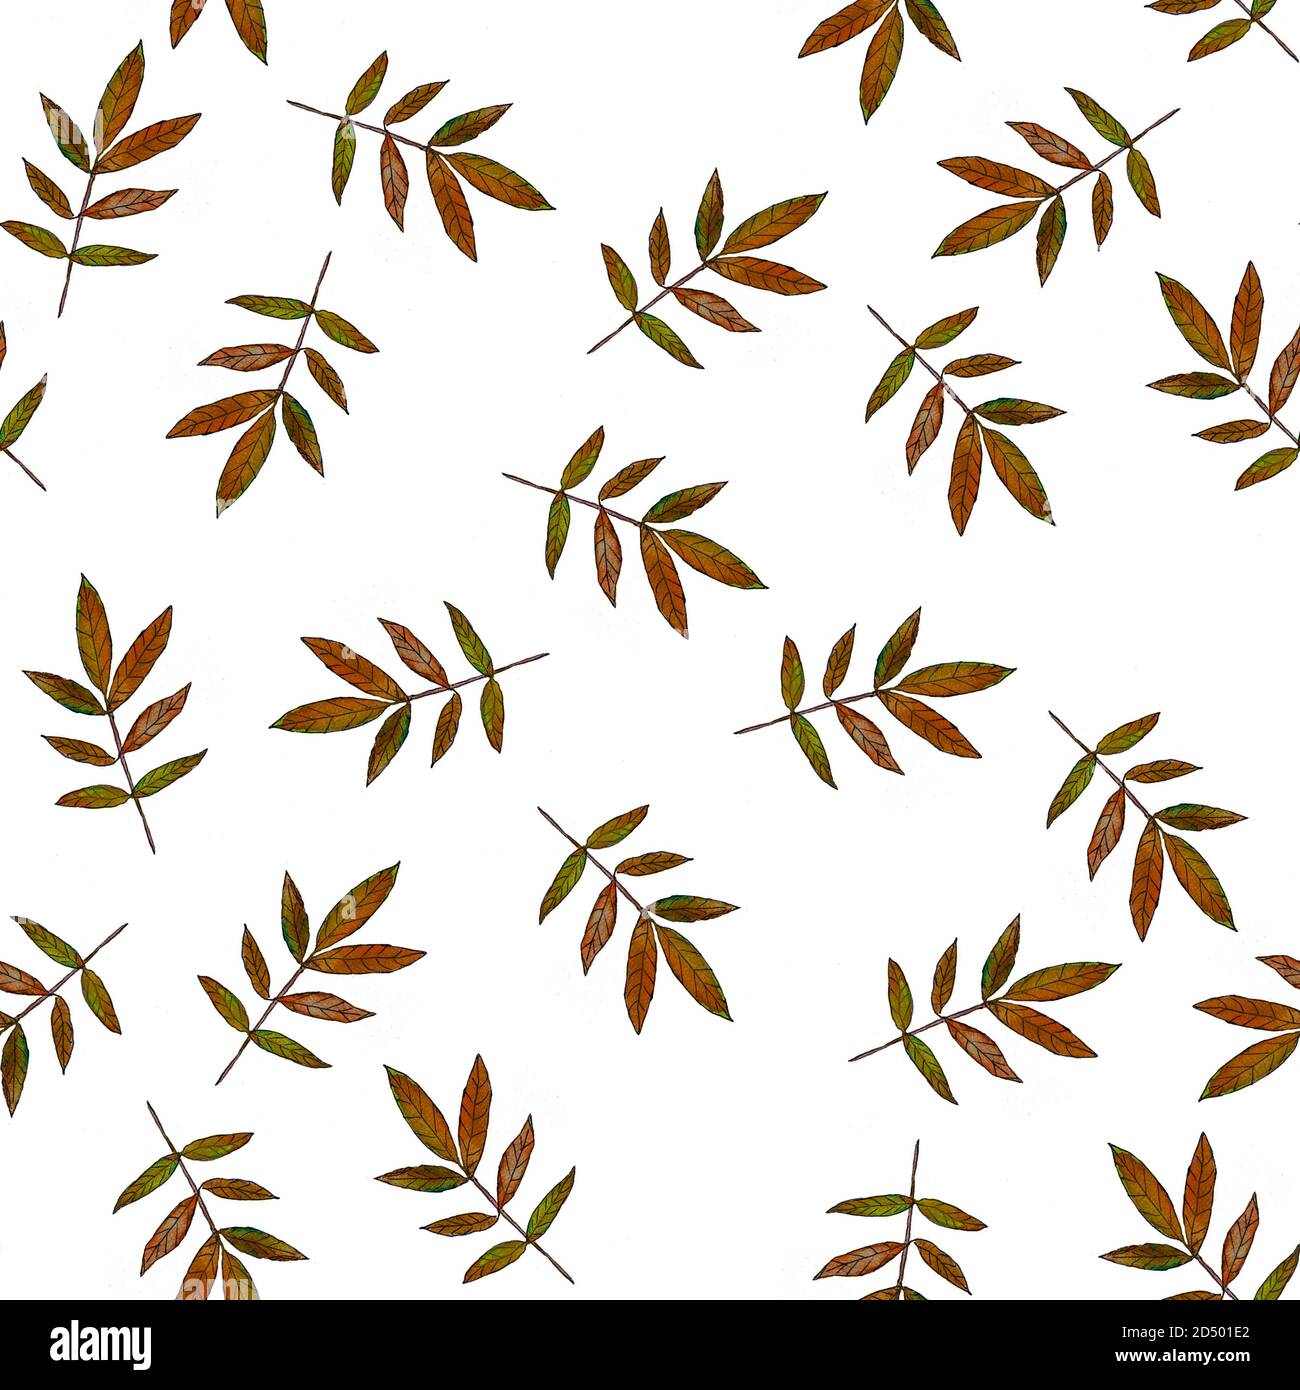 repeating watercolor pattern of autumn leaves on white background Stock Photo